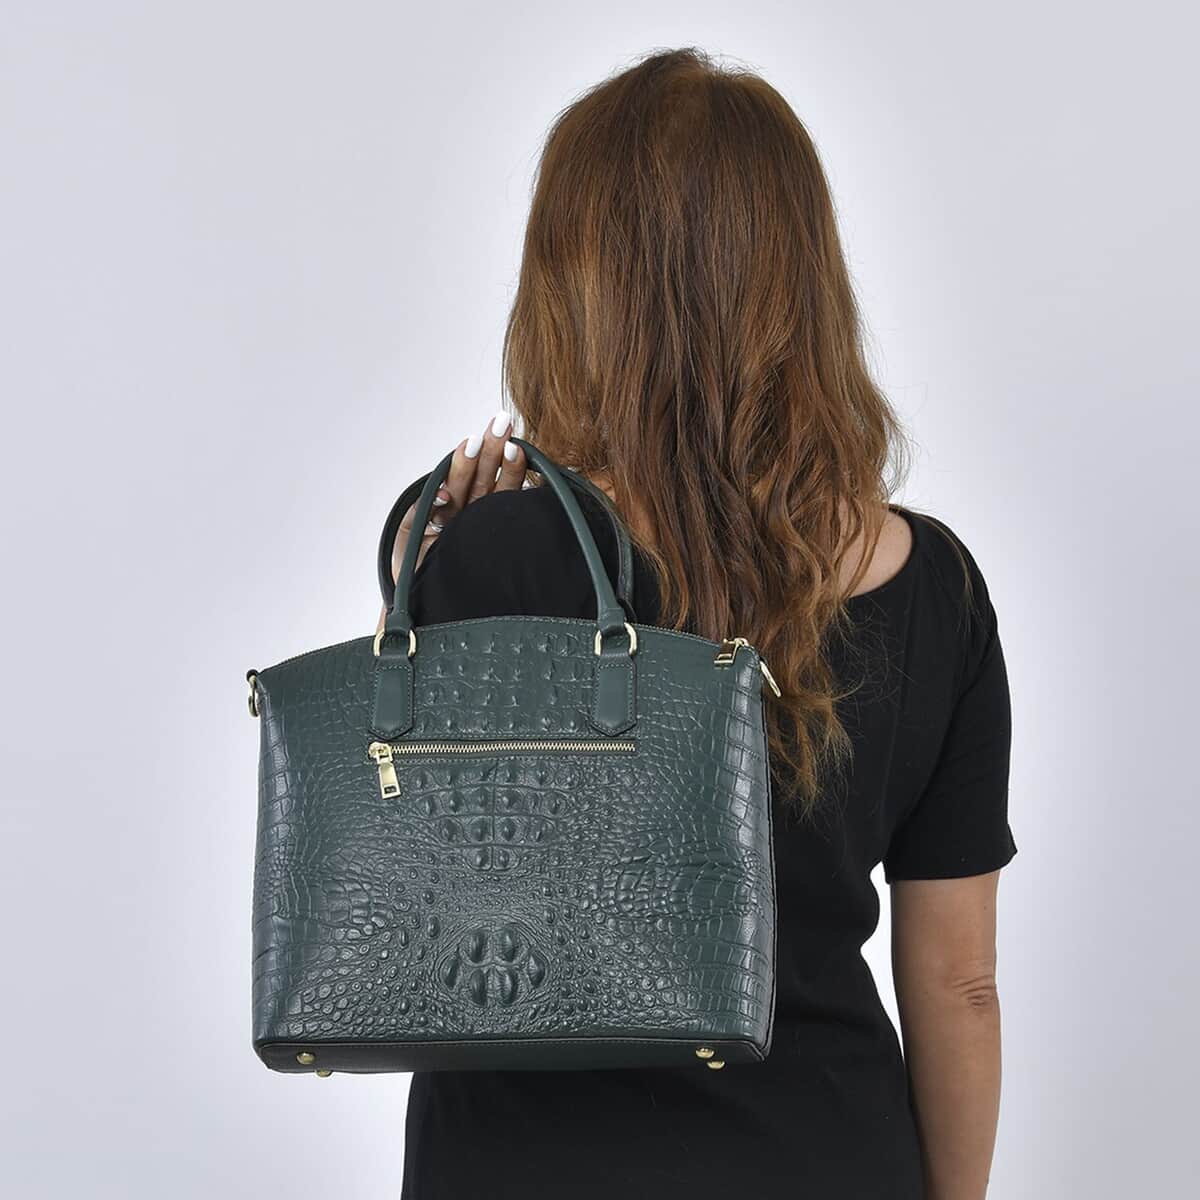 THE MONACO Dark Green with Black Croco Embossed Genuine Leather Tote Bag (12.99"x4.88"x11.6") with Handle Drop and Detachable Long Strap image number 2